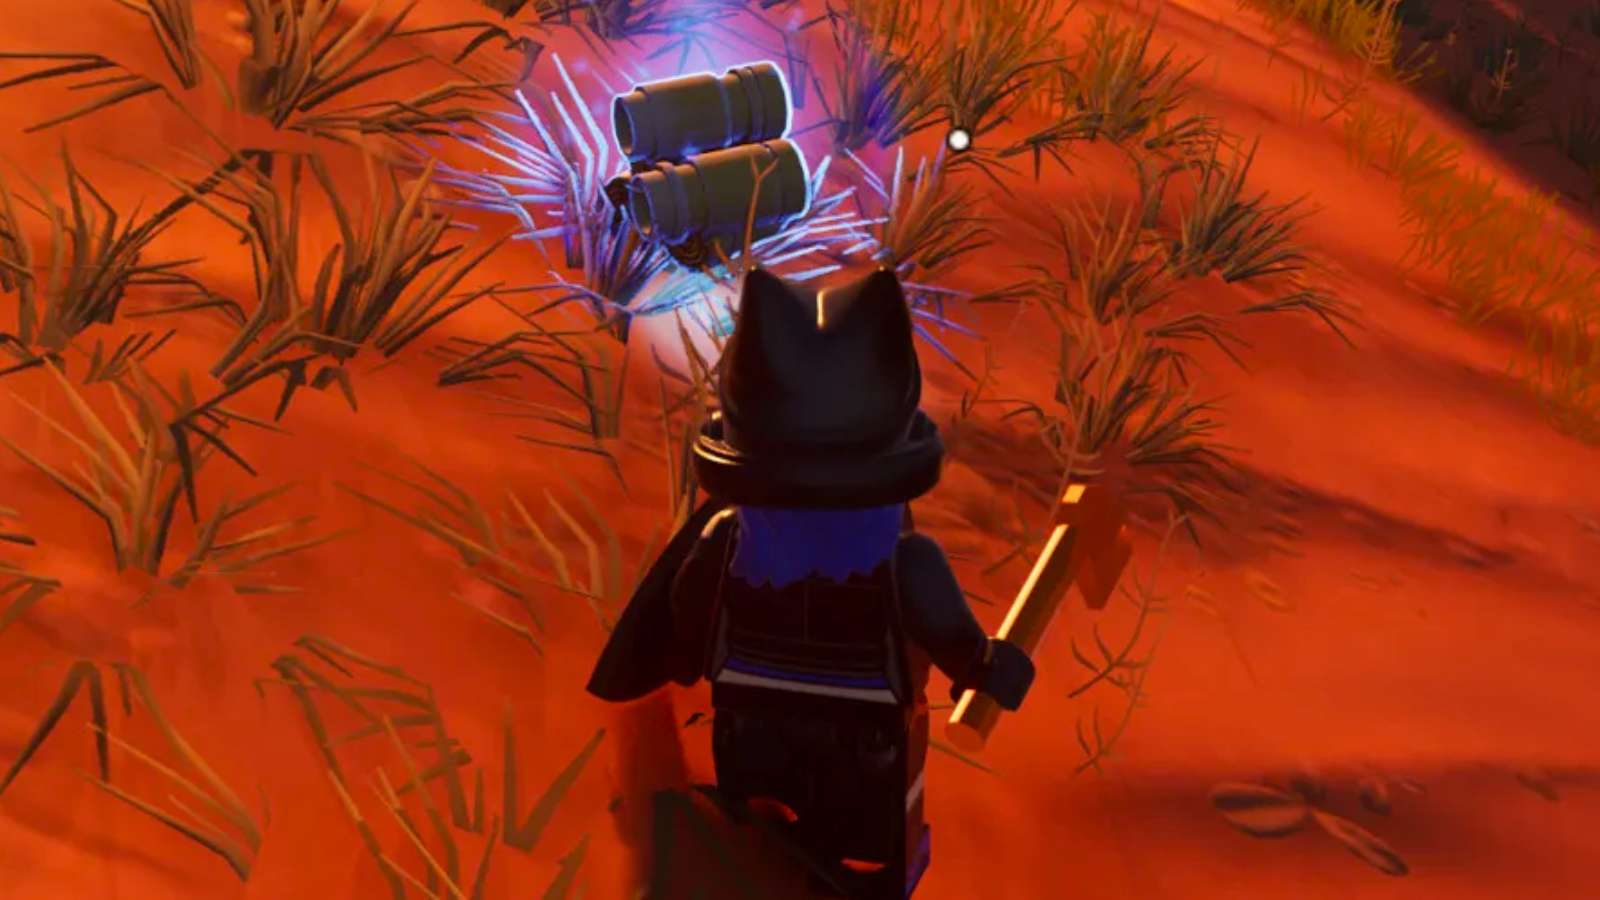 LEGO Fortnite player finding Flexwood in the game.